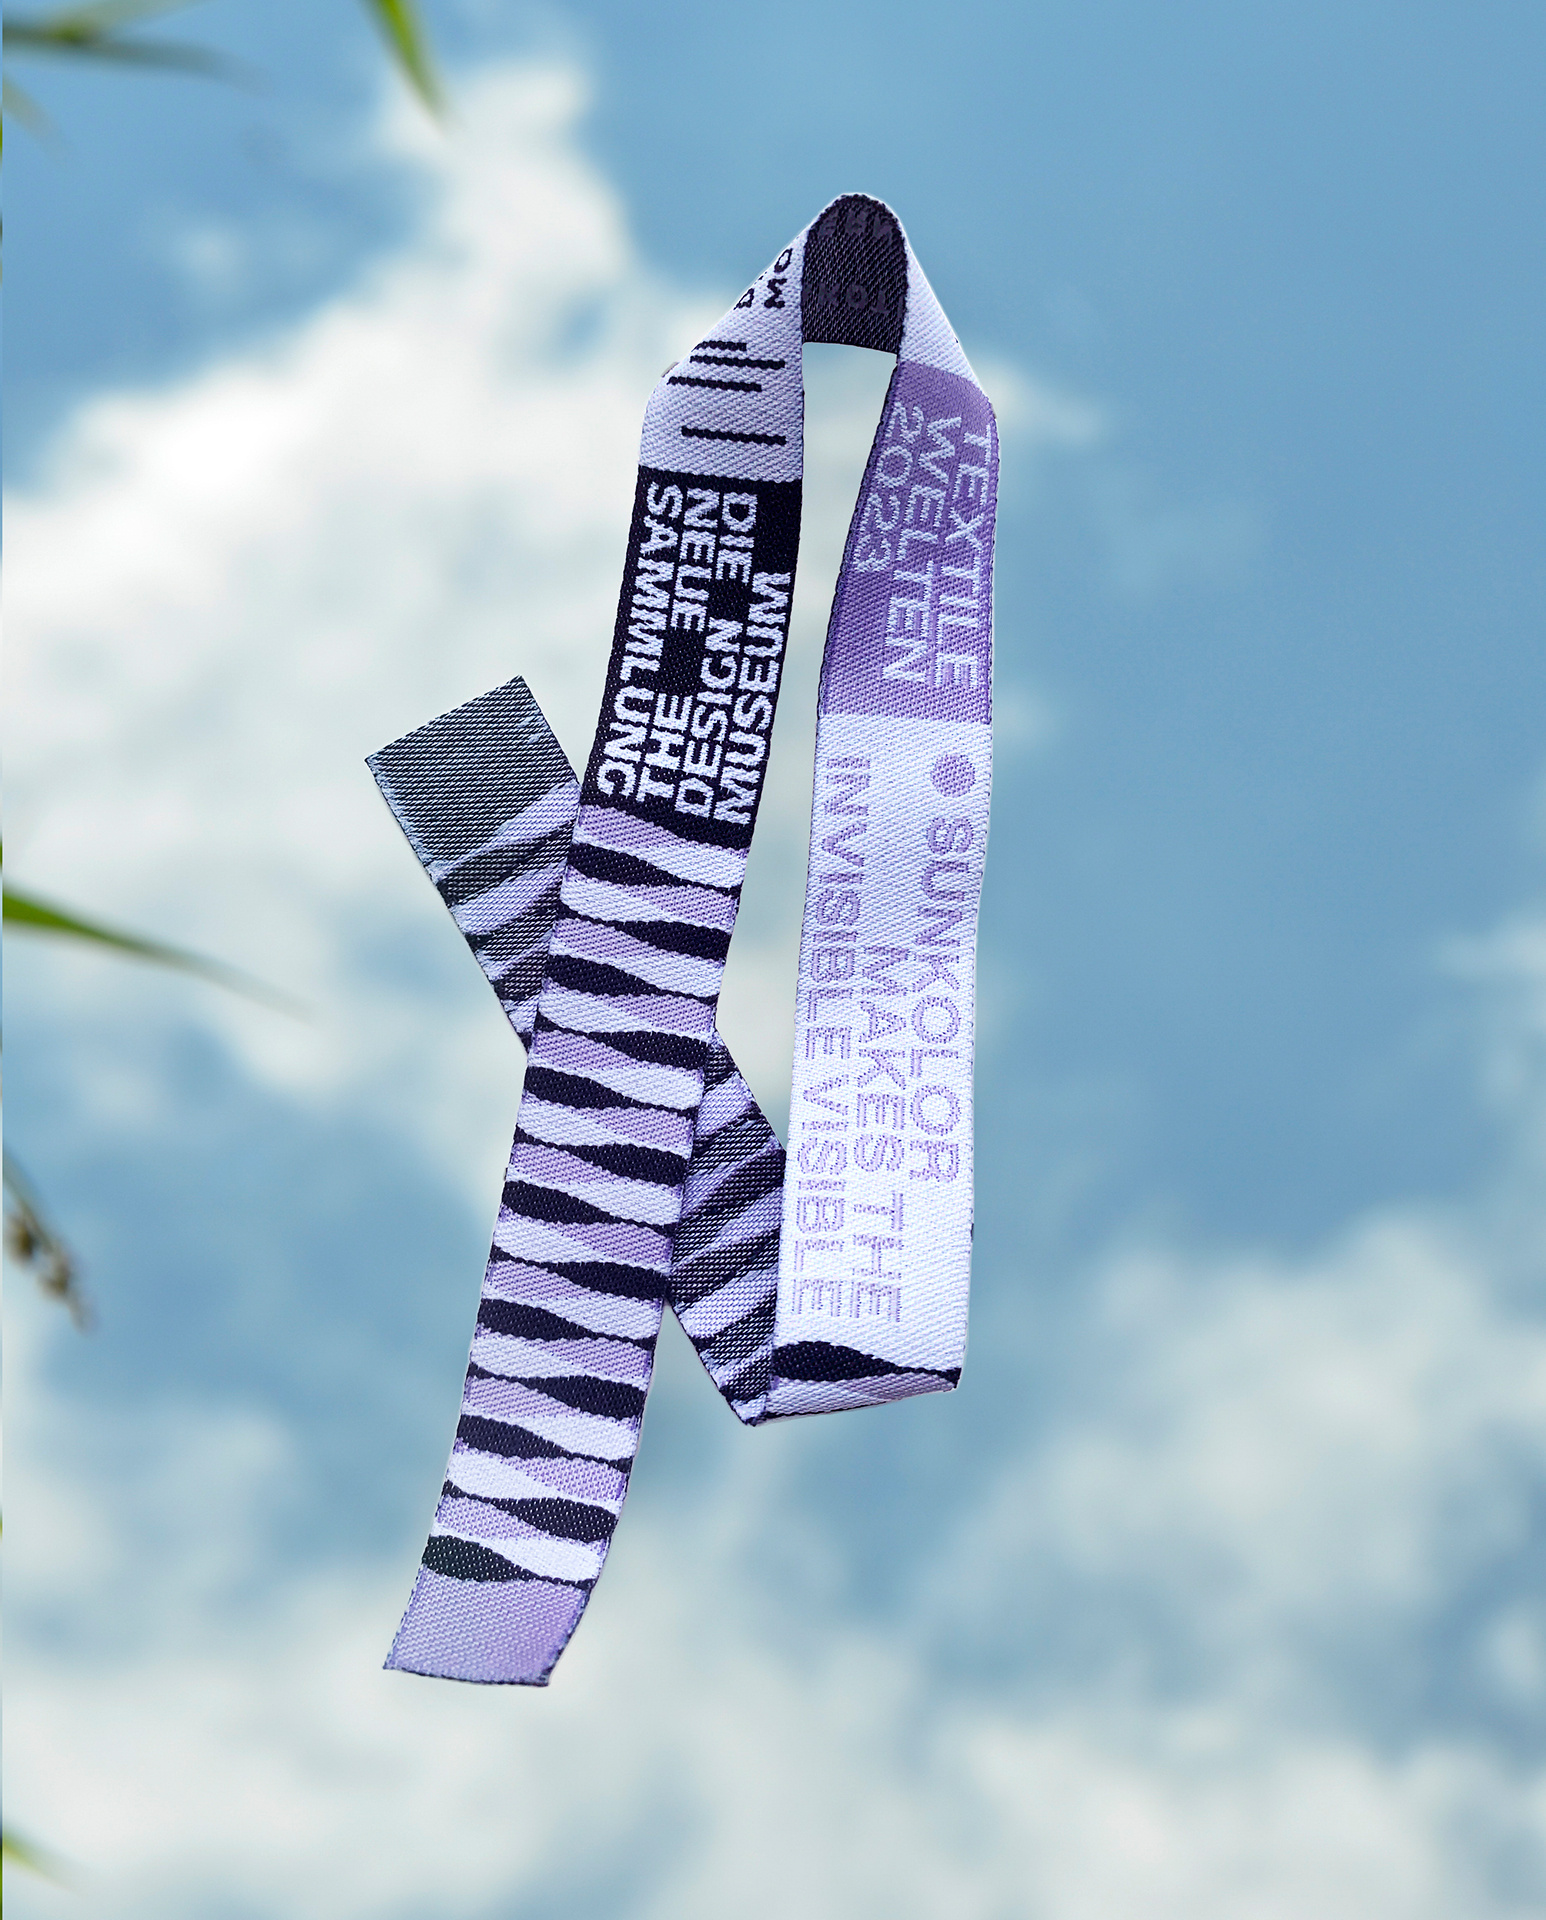 Edited photo. A black, purple and white ribbon of plastic fibre floats above a sunny cloudy sky.